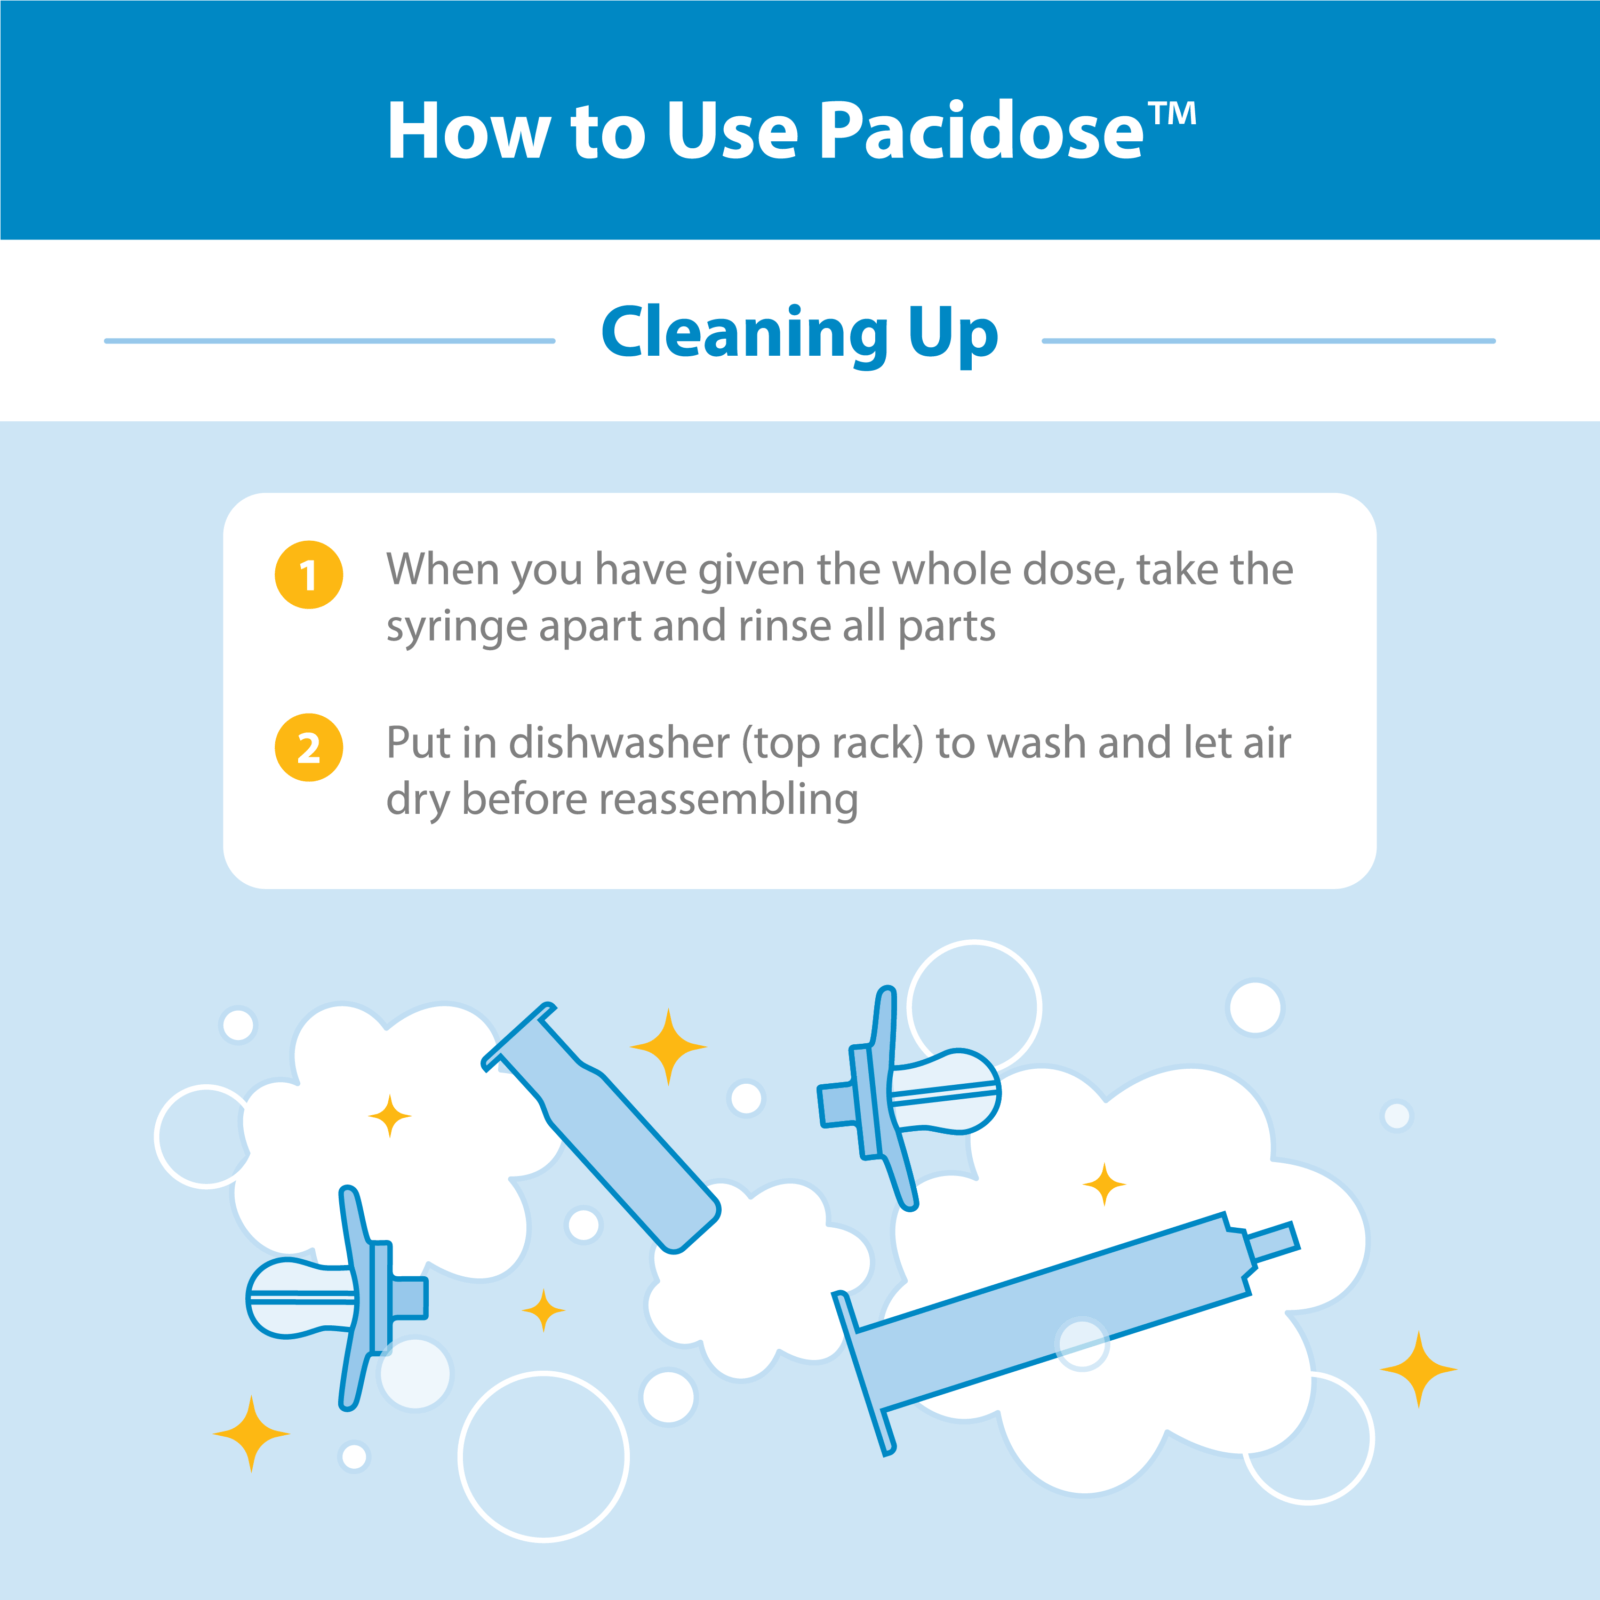 How to Use Pacidose Cleaning Up 1. When you have given the whole dose, take the syringe apart and rinse all parts. 2. Put in dishwasher (top rack) to wash and let air dry before reassembling.